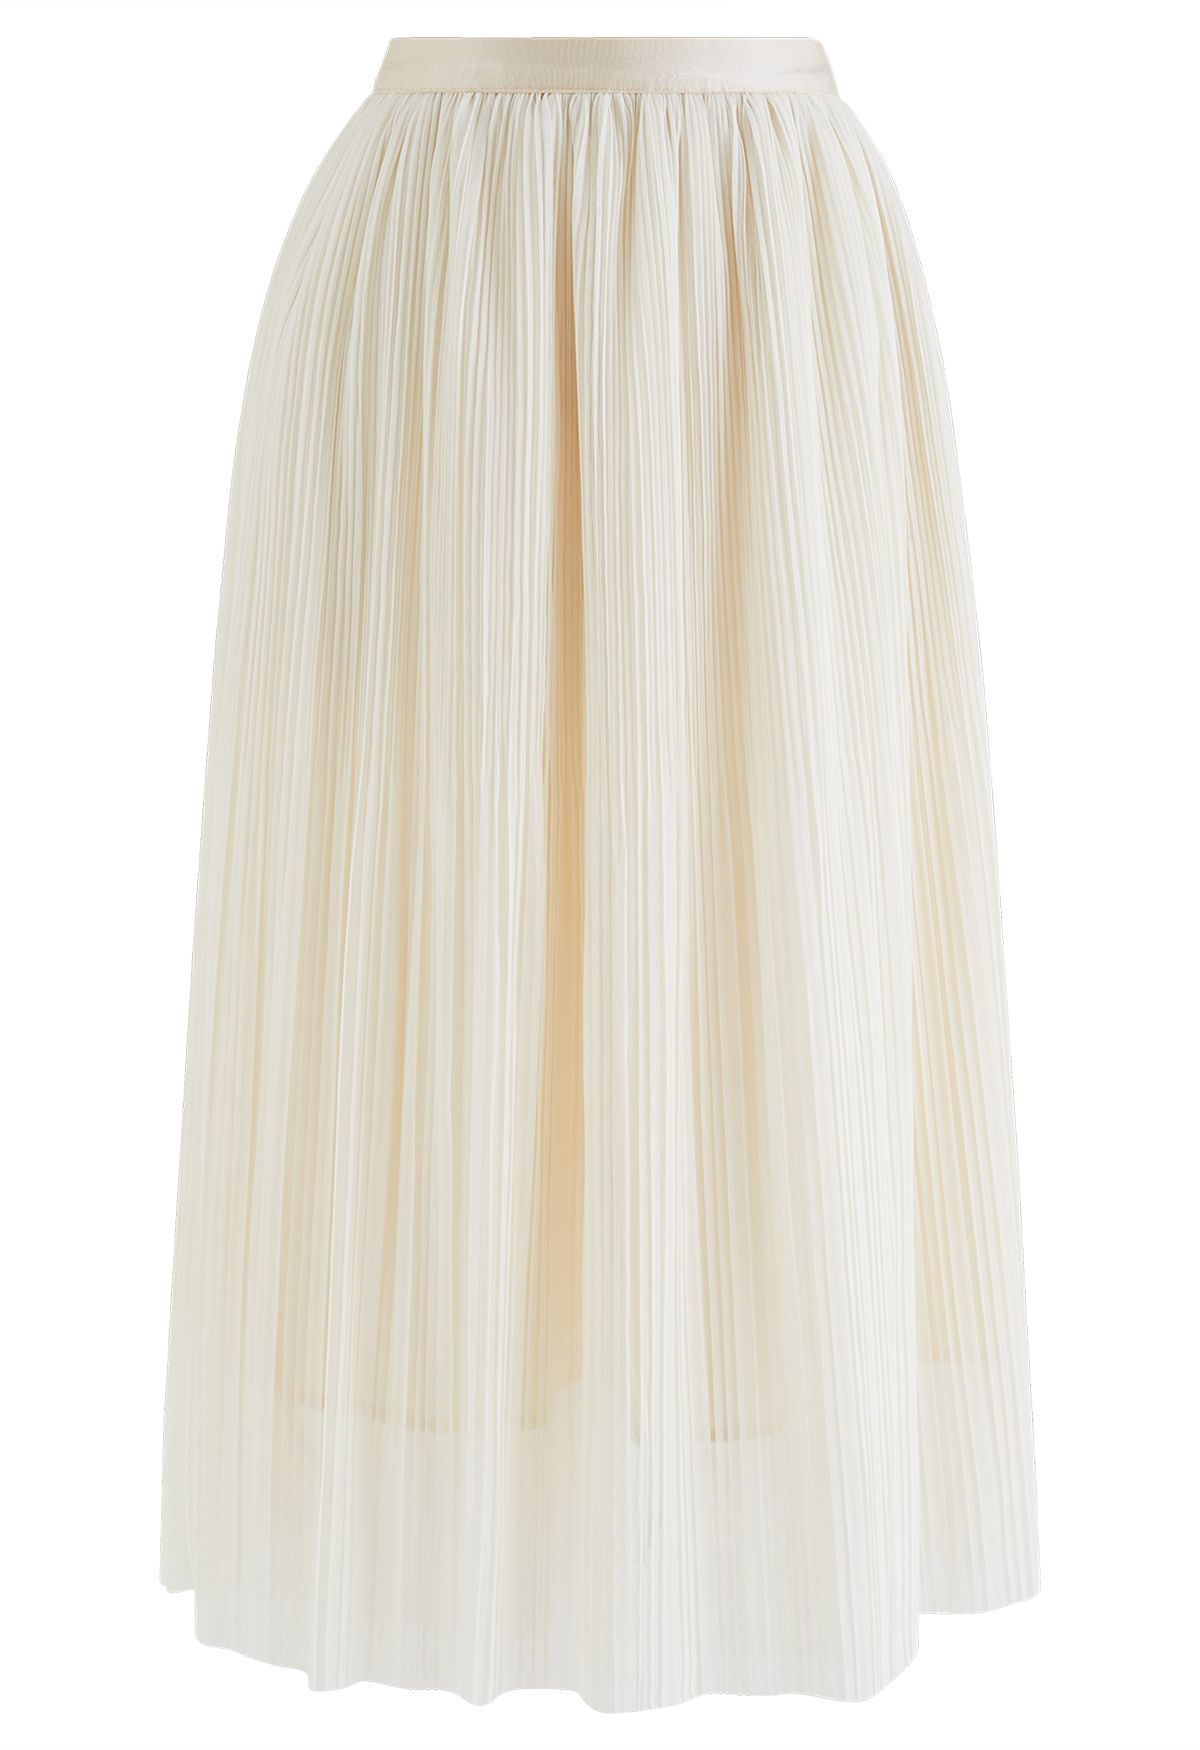 Plisse Double-Layered Mesh Tulle Skirt in Cream | Chicwish